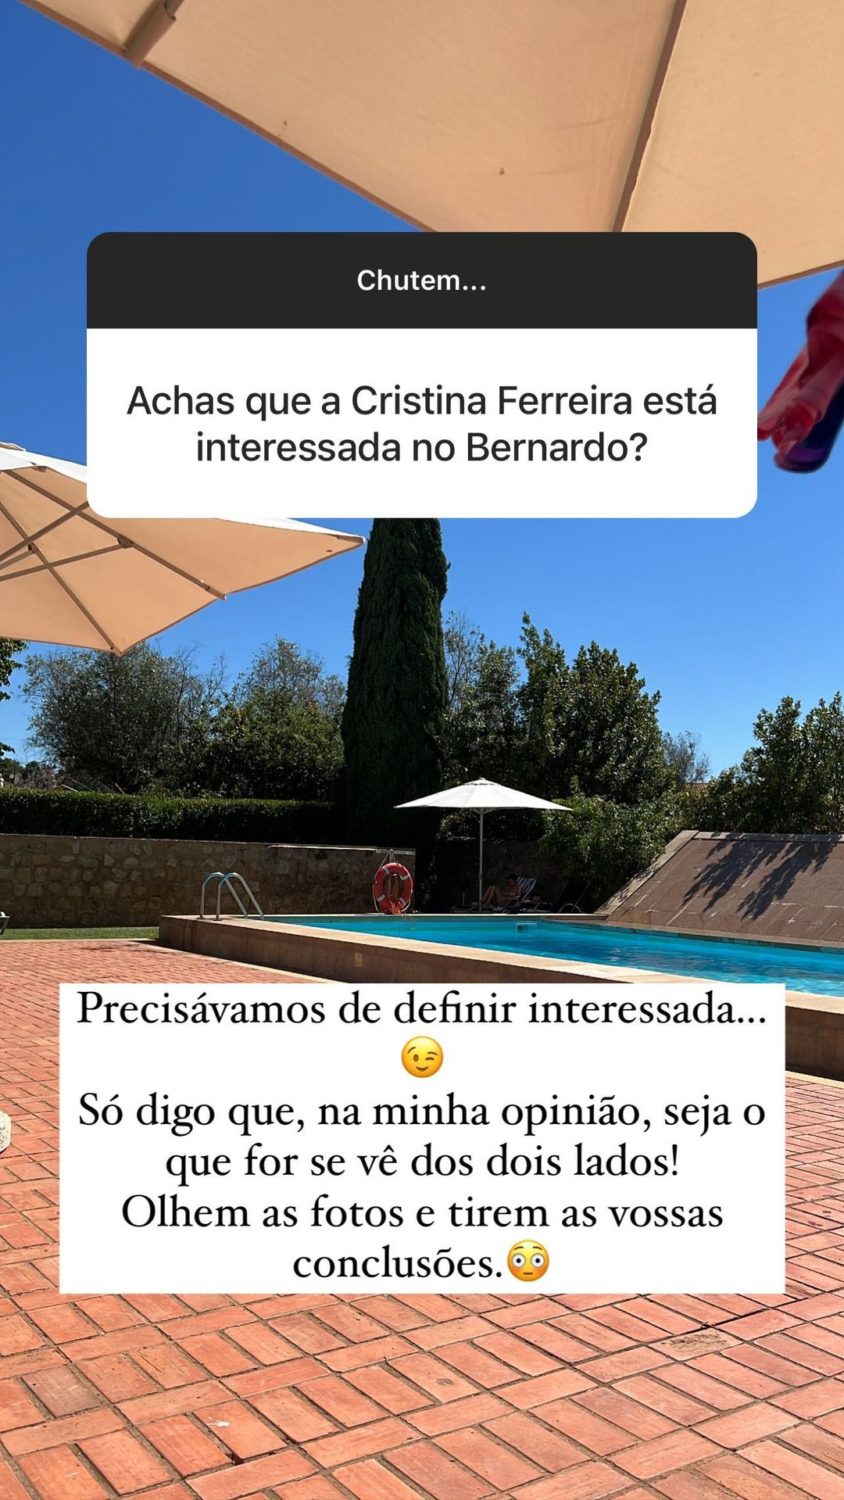 After the rumors, the specialist replies: & # 8220;  Do you think Cristina Ferreira is interested in Bernardo?  & # 8221;